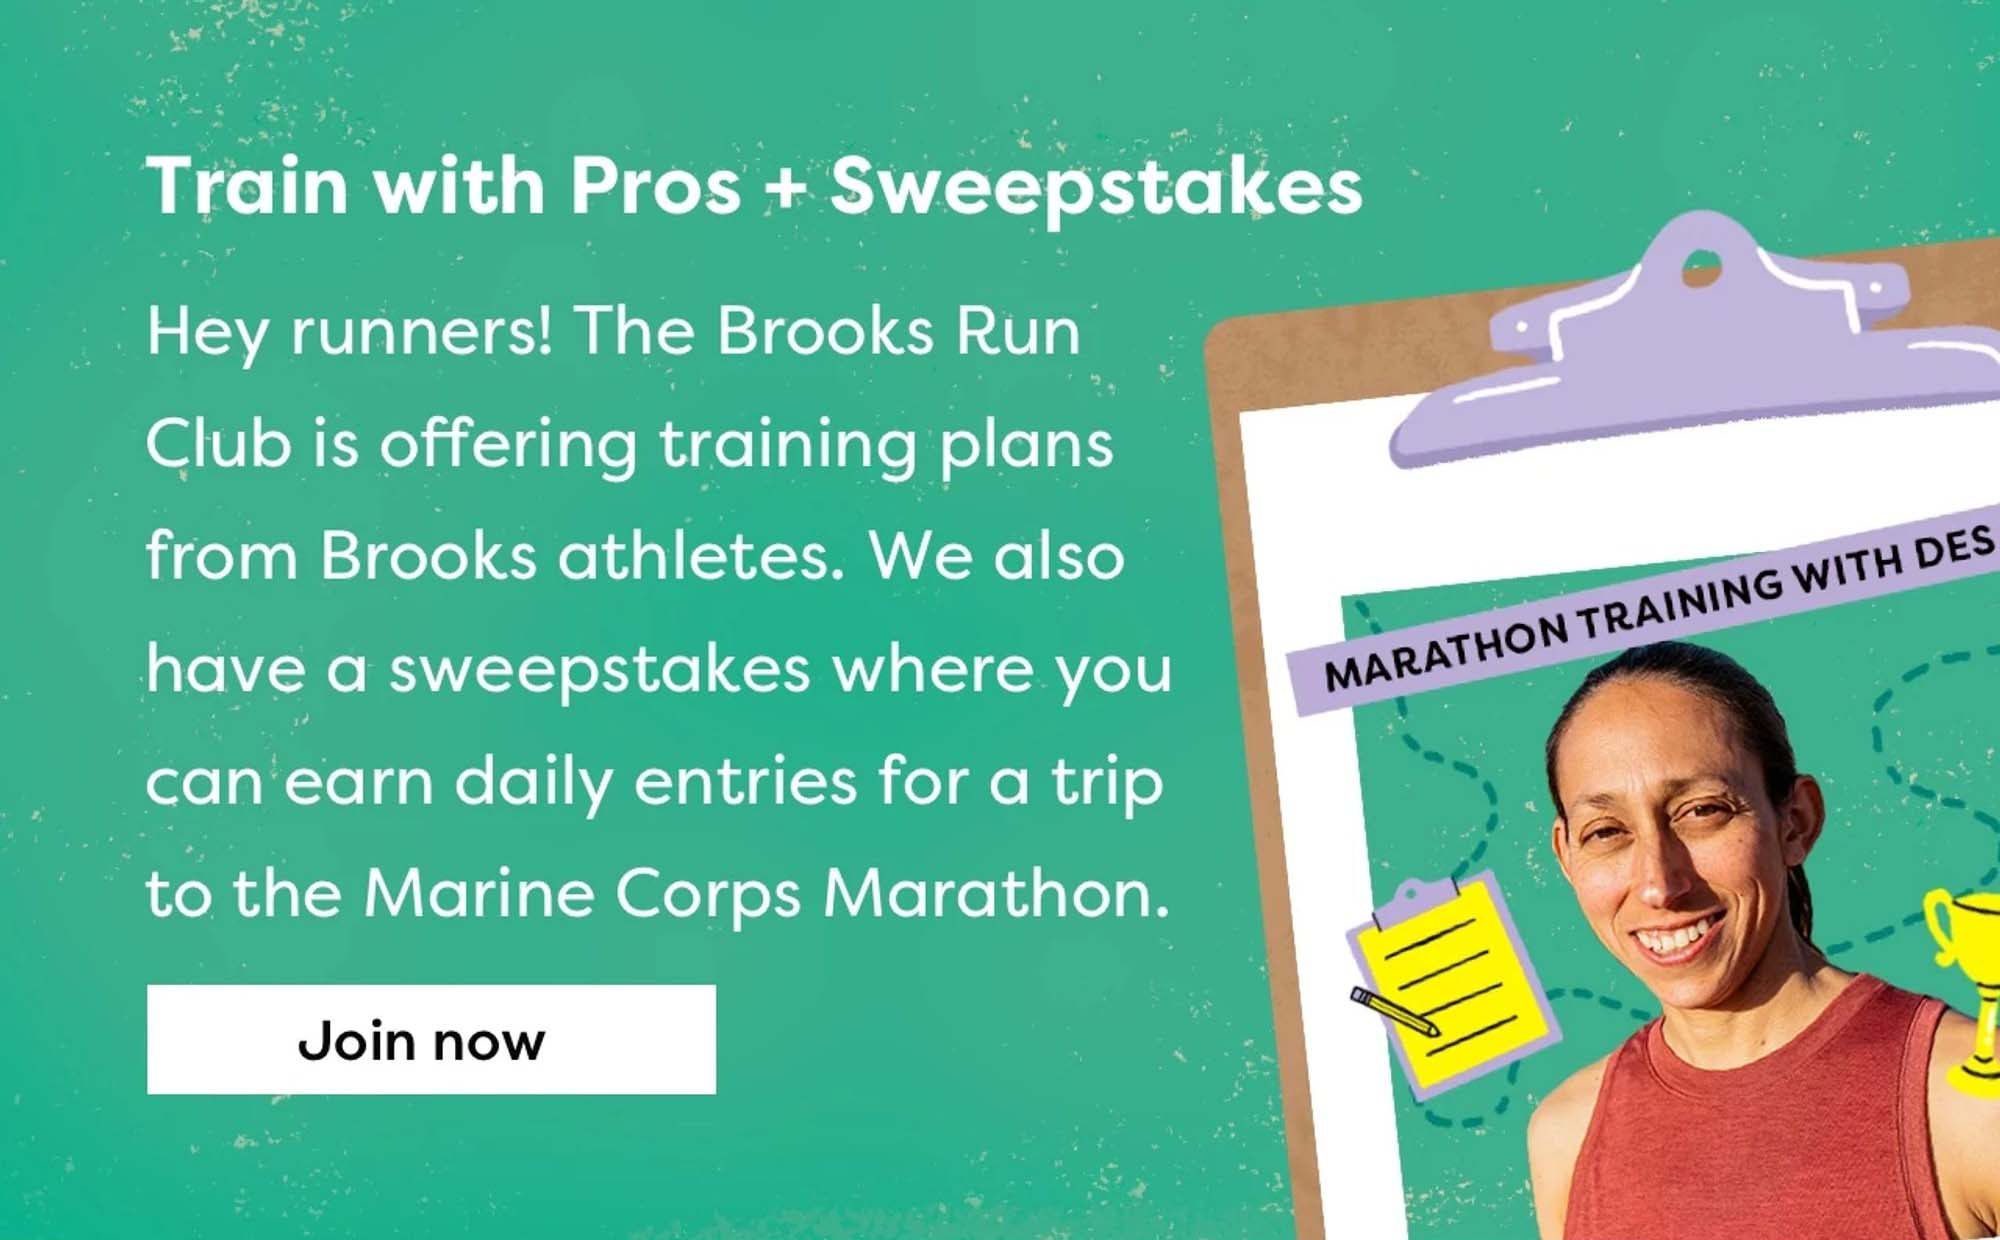 Train with the Pros + Sweepstakes | Hey runners! The Brooks Run Club is offering training plans form Brooks athletes. We also have a sweepstakes where you can earn daily entries for a trip to the Marine Corps Marathon | Join now